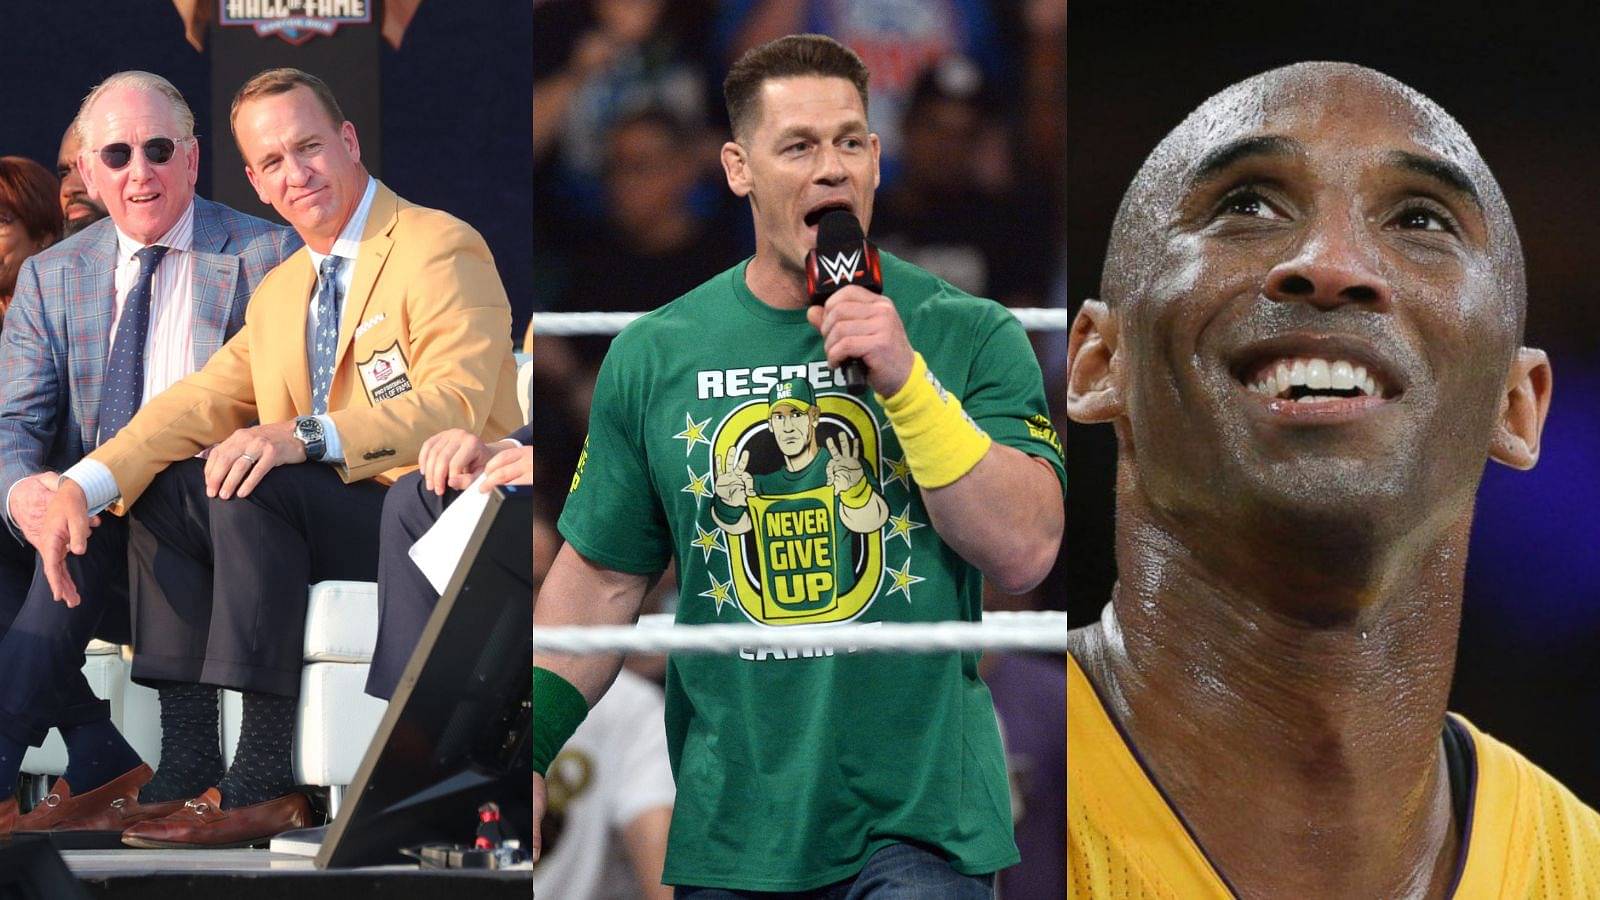 “Kobe Bryant and Peyton Manning’s final games had 1 thing in common- NO PASSING”: John Cena once savagely destroyed the Lakers legend